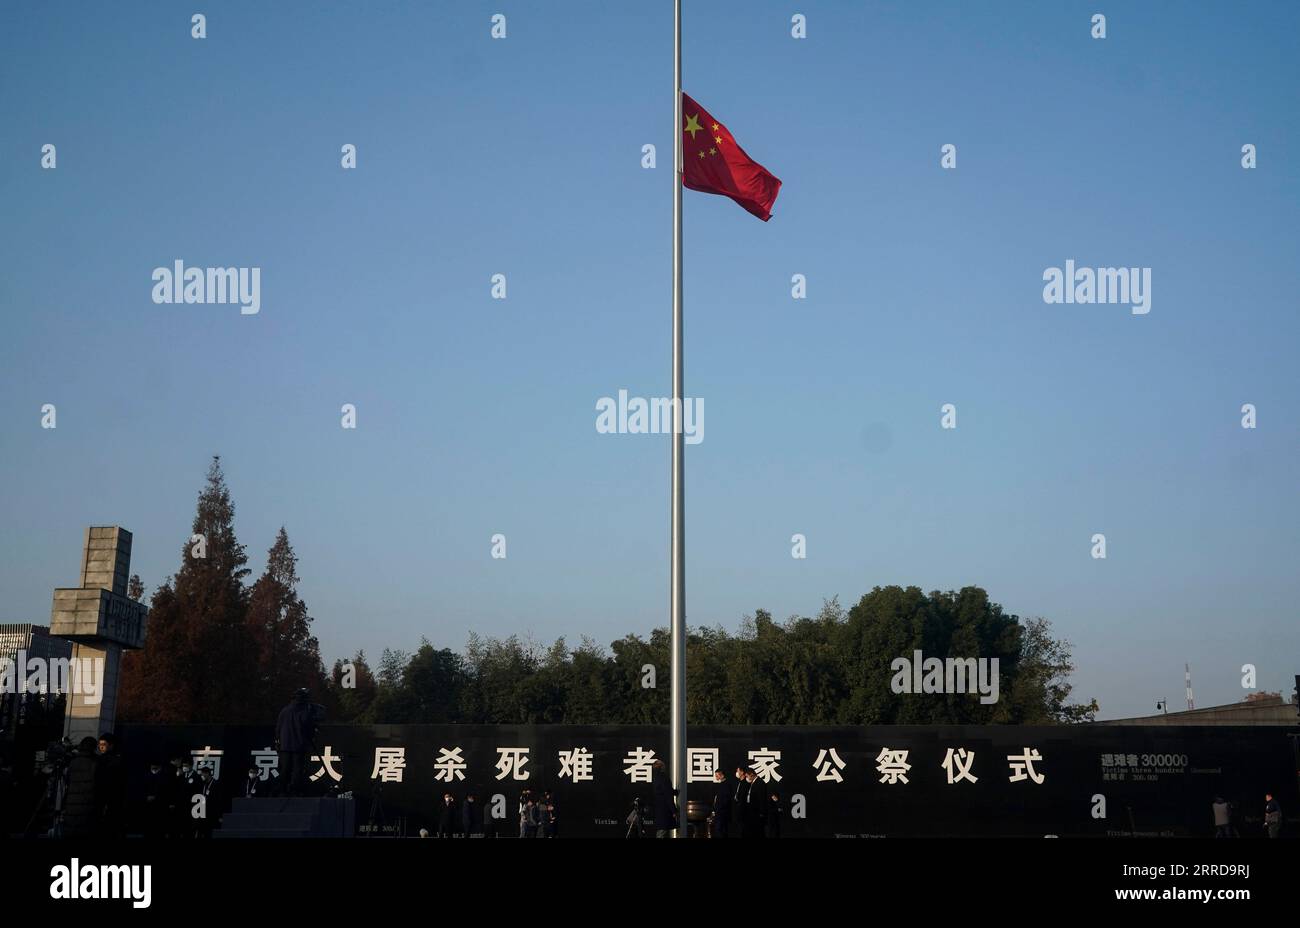 211213 -- NANJING, Dec. 13, 2021 -- China s national flag flies at half mast ahead of the national memorial ceremony for the Nanjing Massacre victims at the Memorial Hall of the Victims of the Nanjing Massacre by Japanese Invaders in Nanjing, capital of east China s Jiangsu Province, Dec. 13, 2021.  CHINA-JIANGSU-NANJING MASSACRE VICTIMS-NATIONAL MEMORIAL CEREMONY CN JixChunpeng PUBLICATIONxNOTxINxCHN Stock Photo